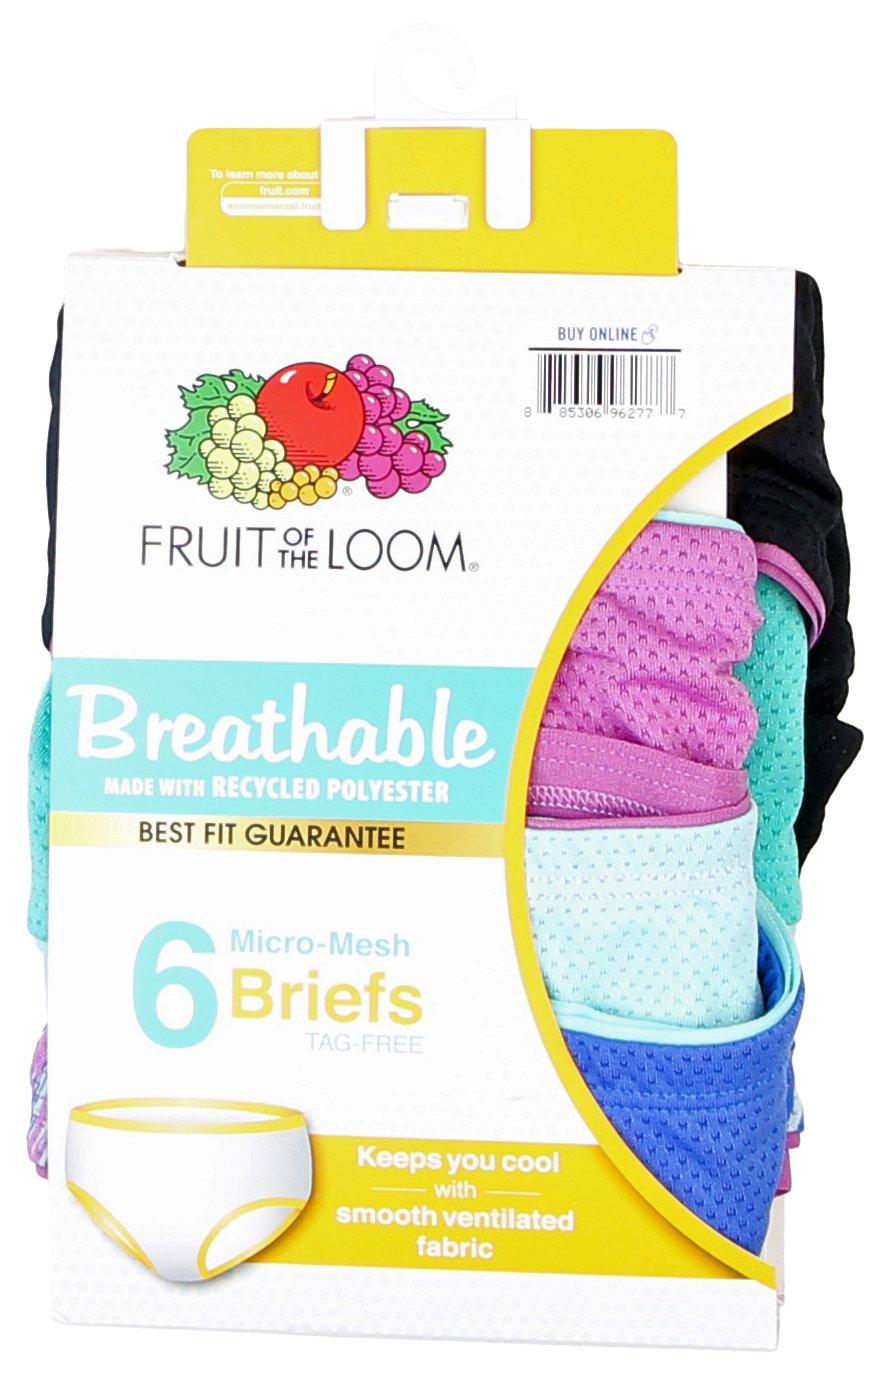 Fruit of the Loom White Cotton Briefs, 6 Pack (Little Girls & Big Girls)